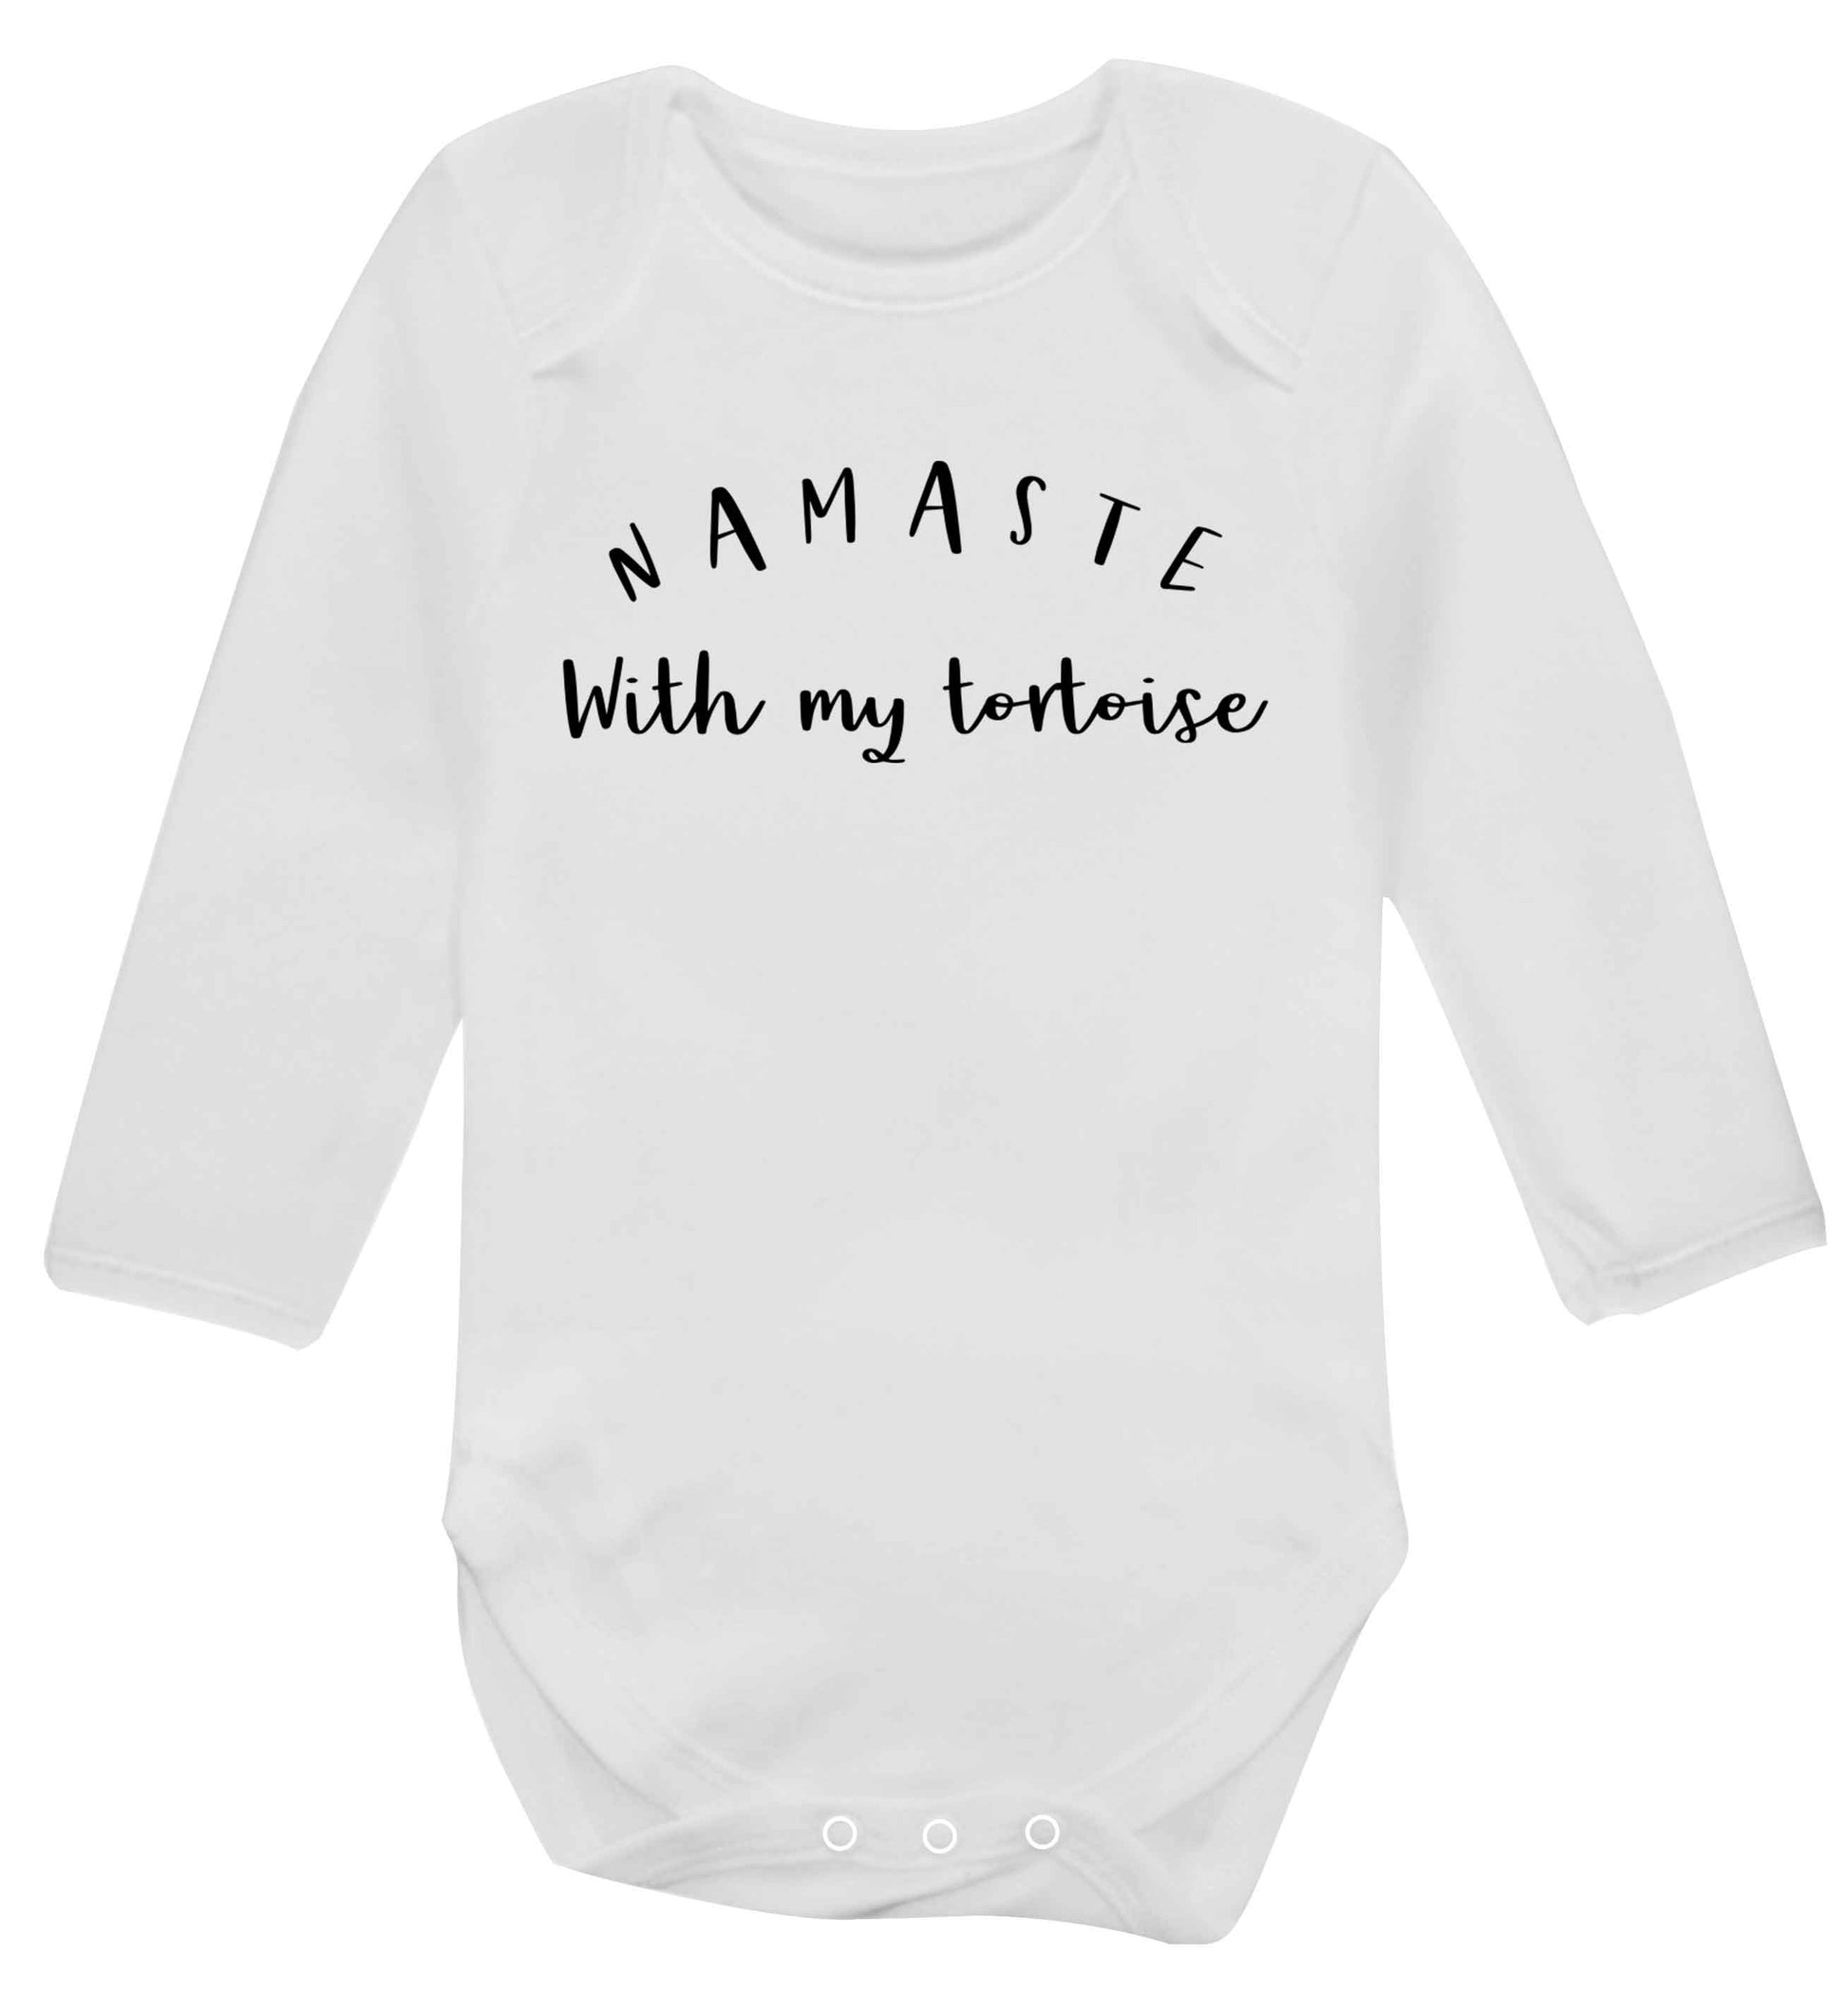 Namaste with my tortoise Baby Vest long sleeved white 6-12 months